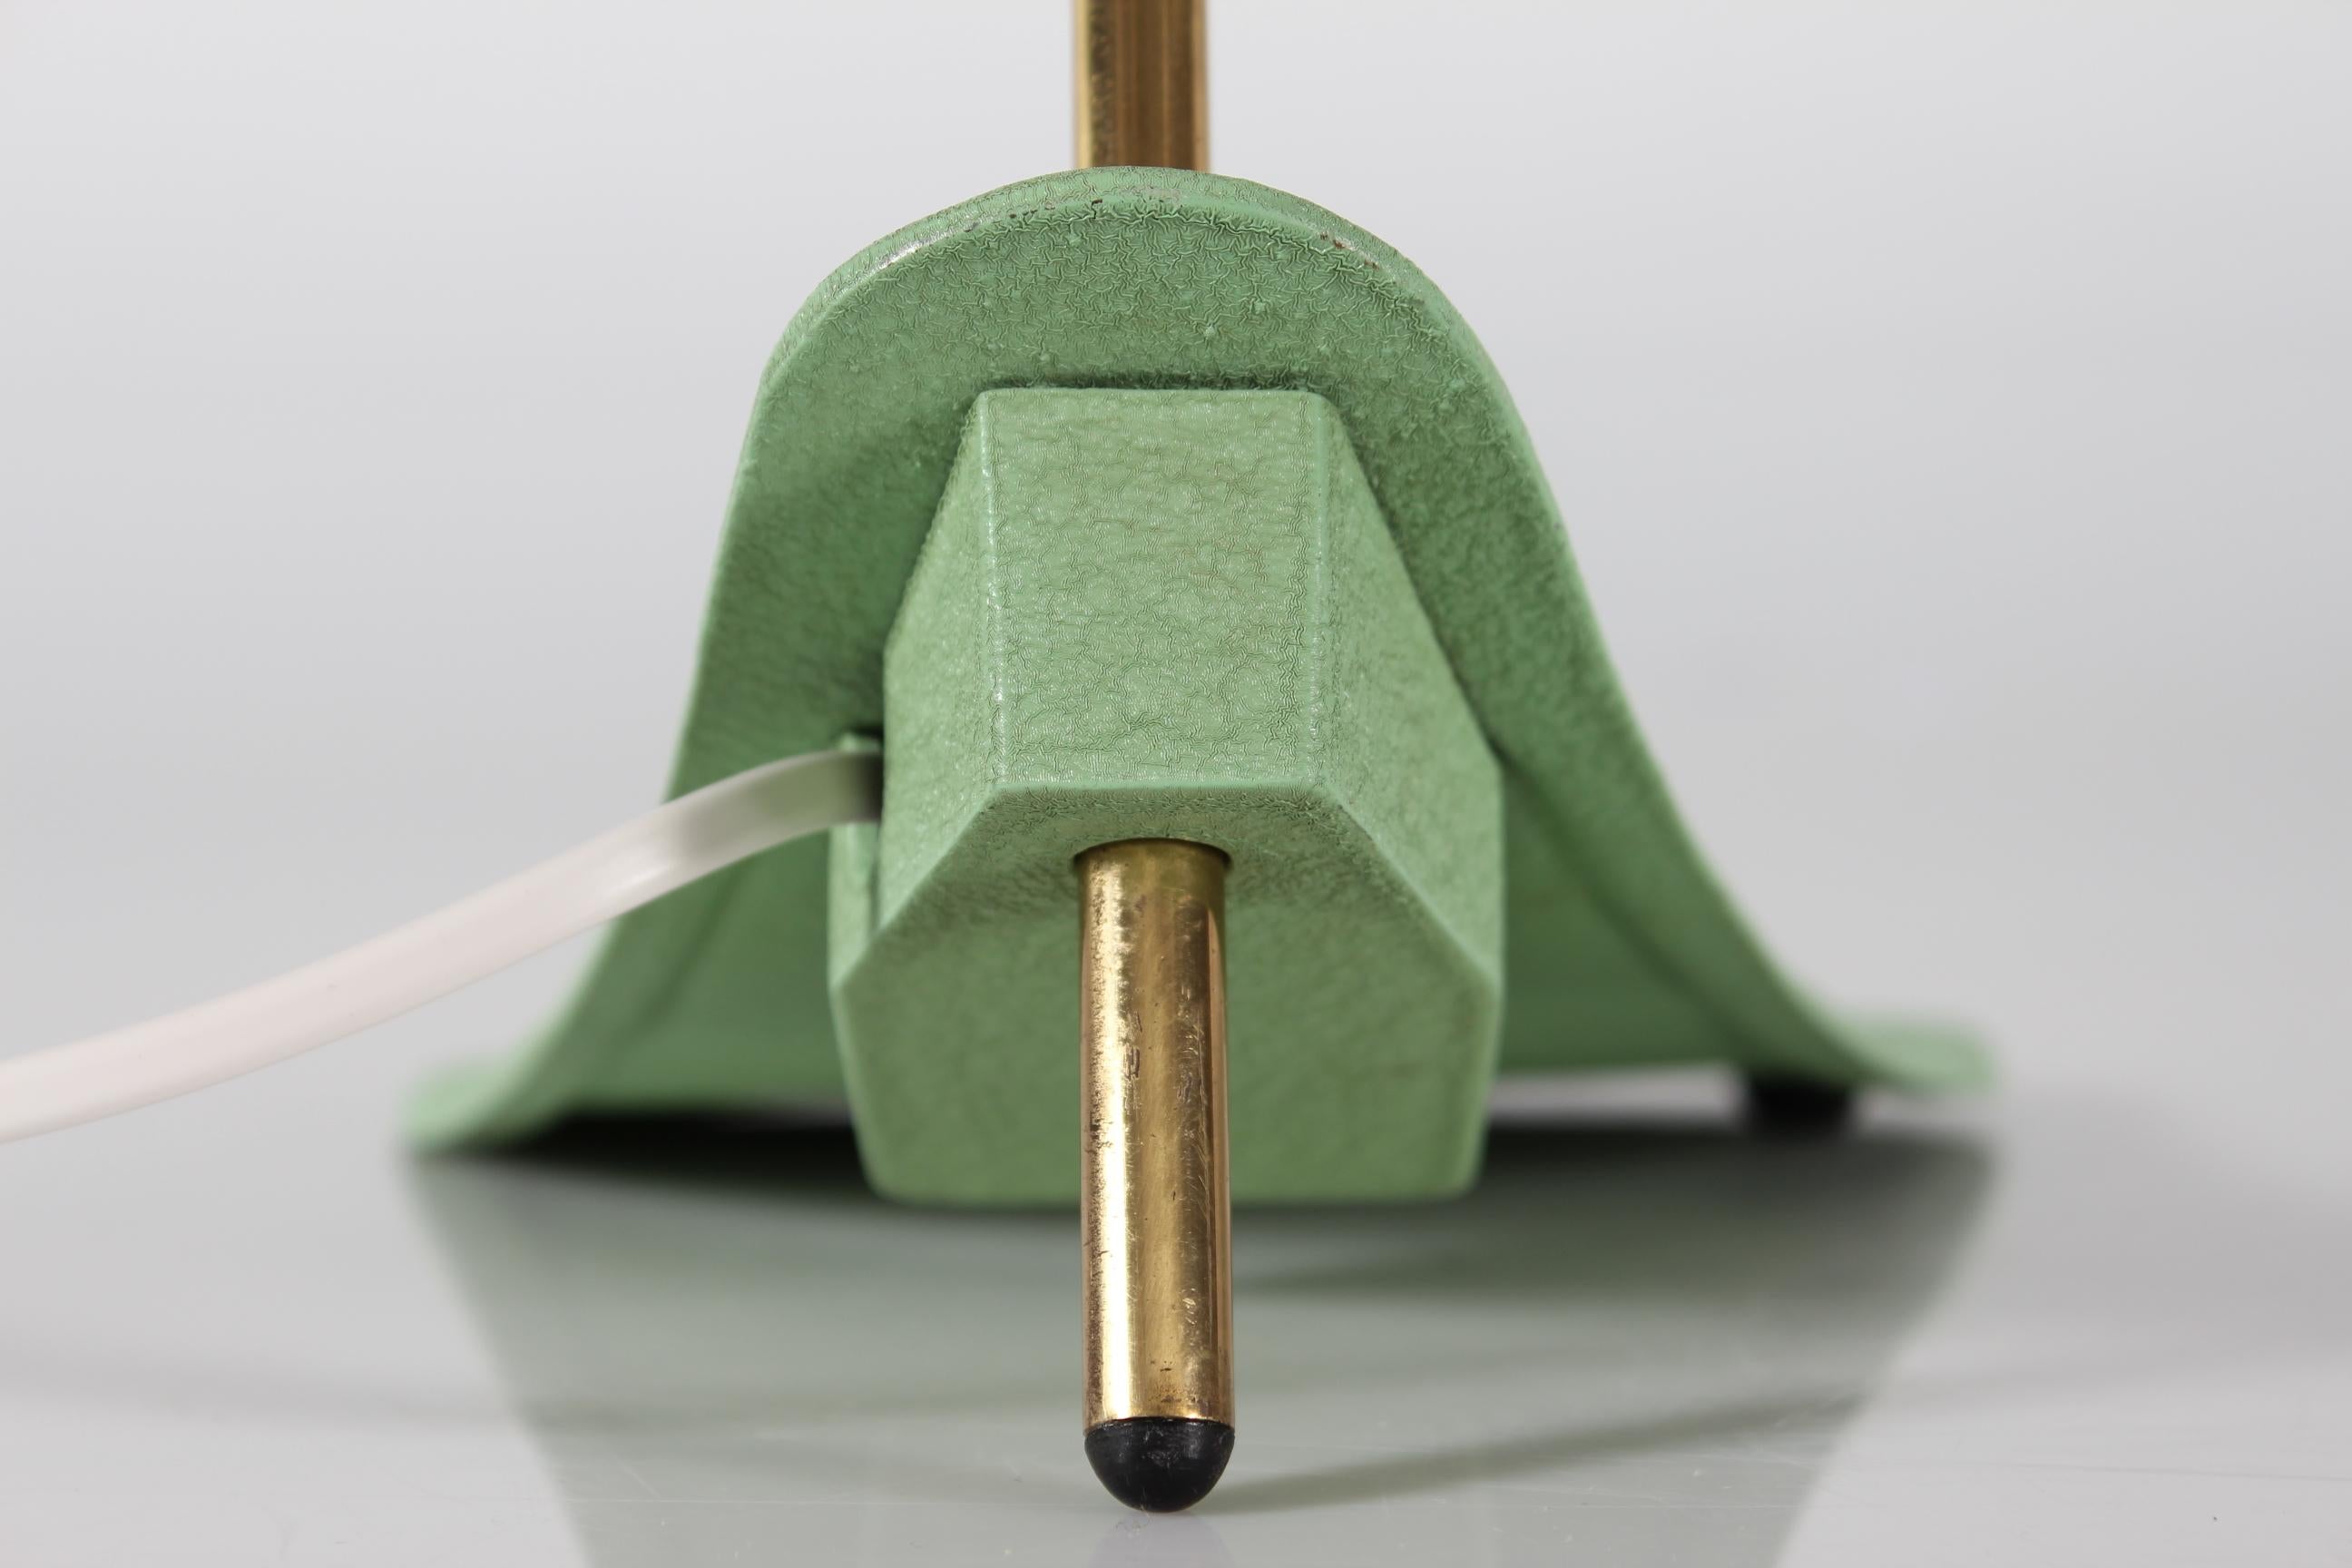 Italian Ufo Table Lamp Dusty Green Lacquer Floating Foot, Stilnovo Style, 1950s For Sale 1